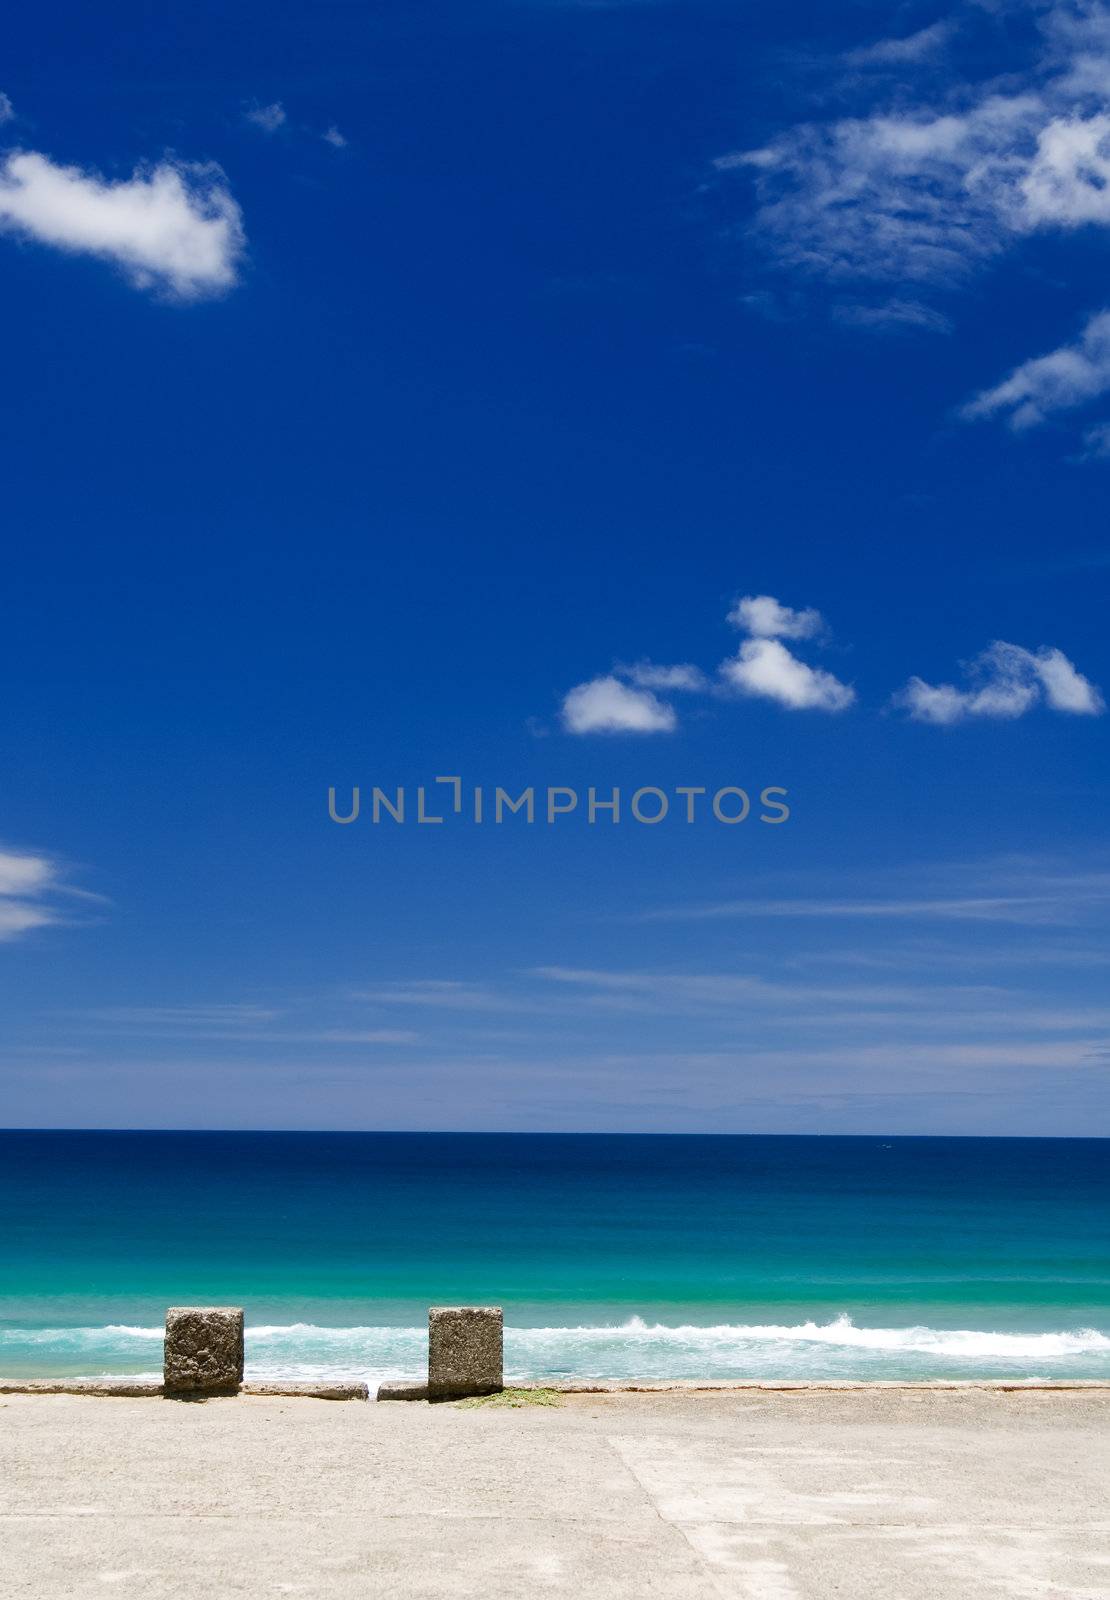 It is a dock with beautiful blue sky.